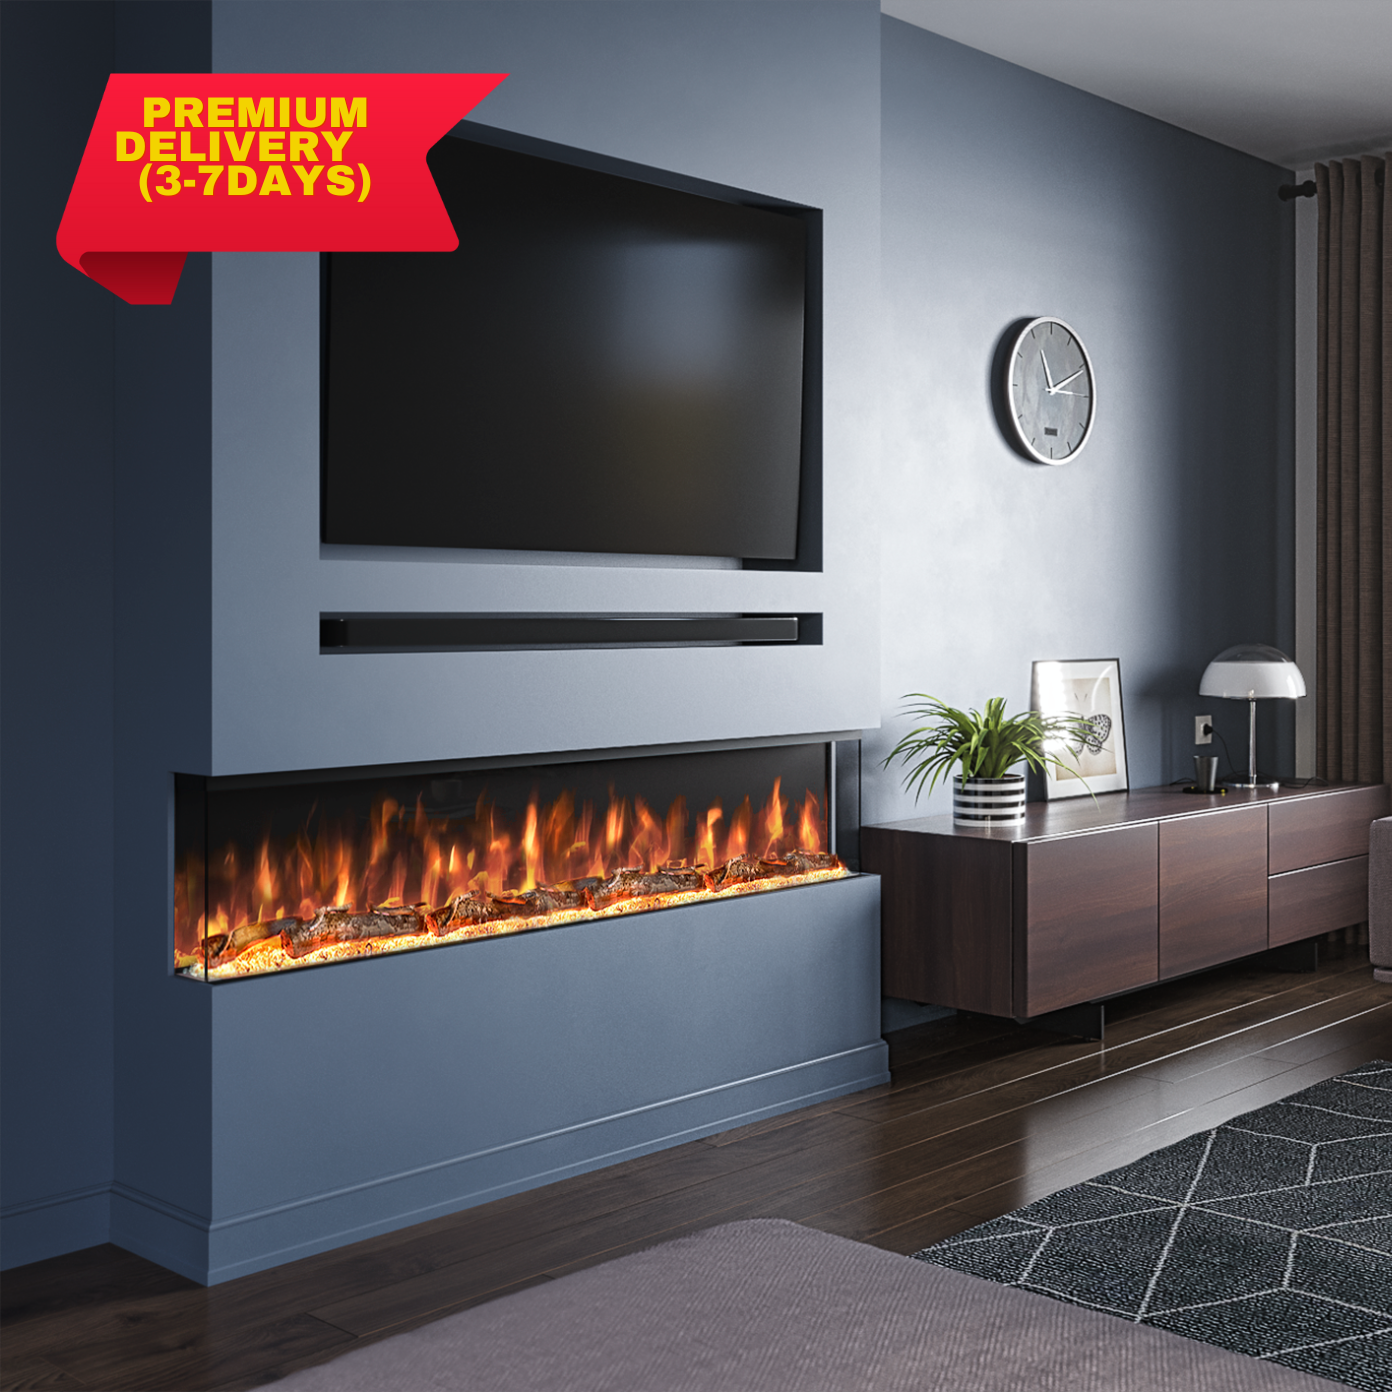 Spectrum Series 60 - 3-Sided Electric Fireplace